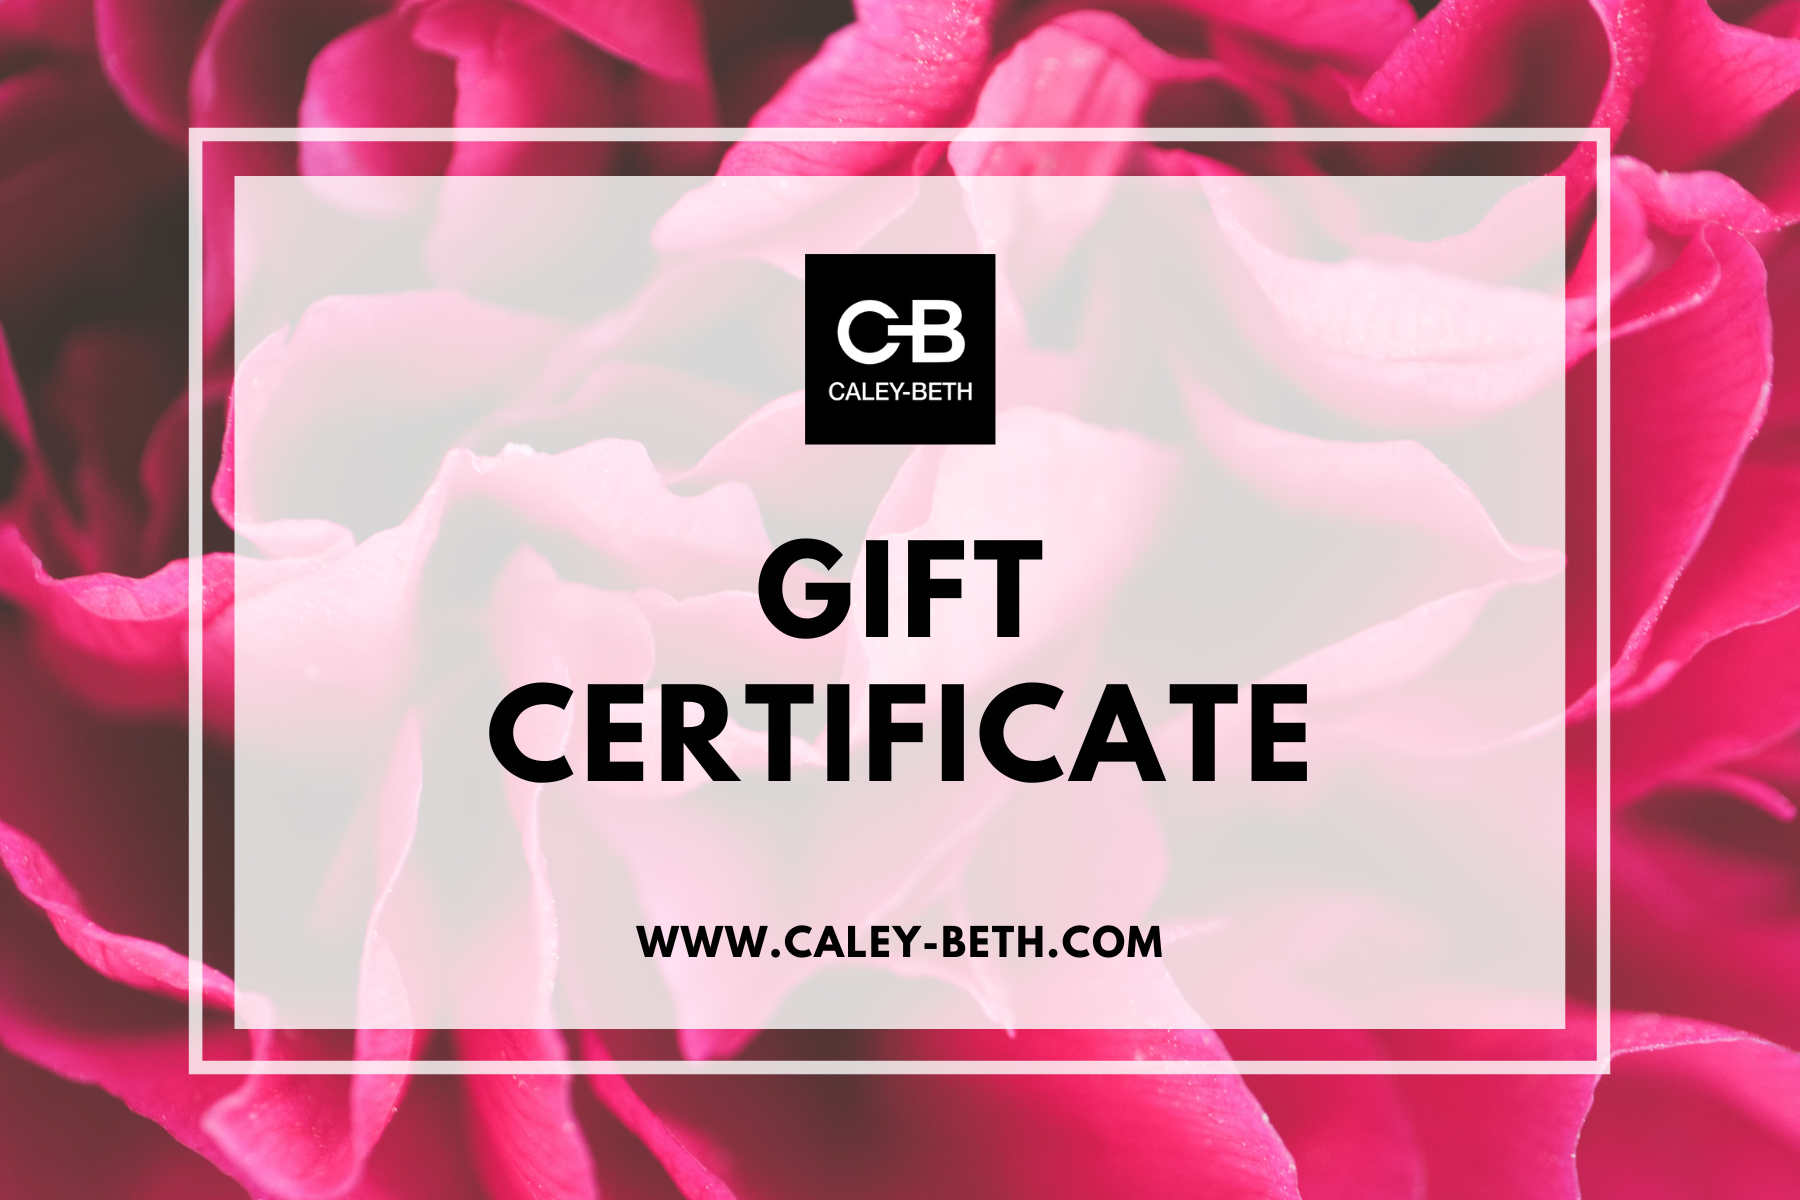 Caley-Beth best online gift cards to give in Canada.